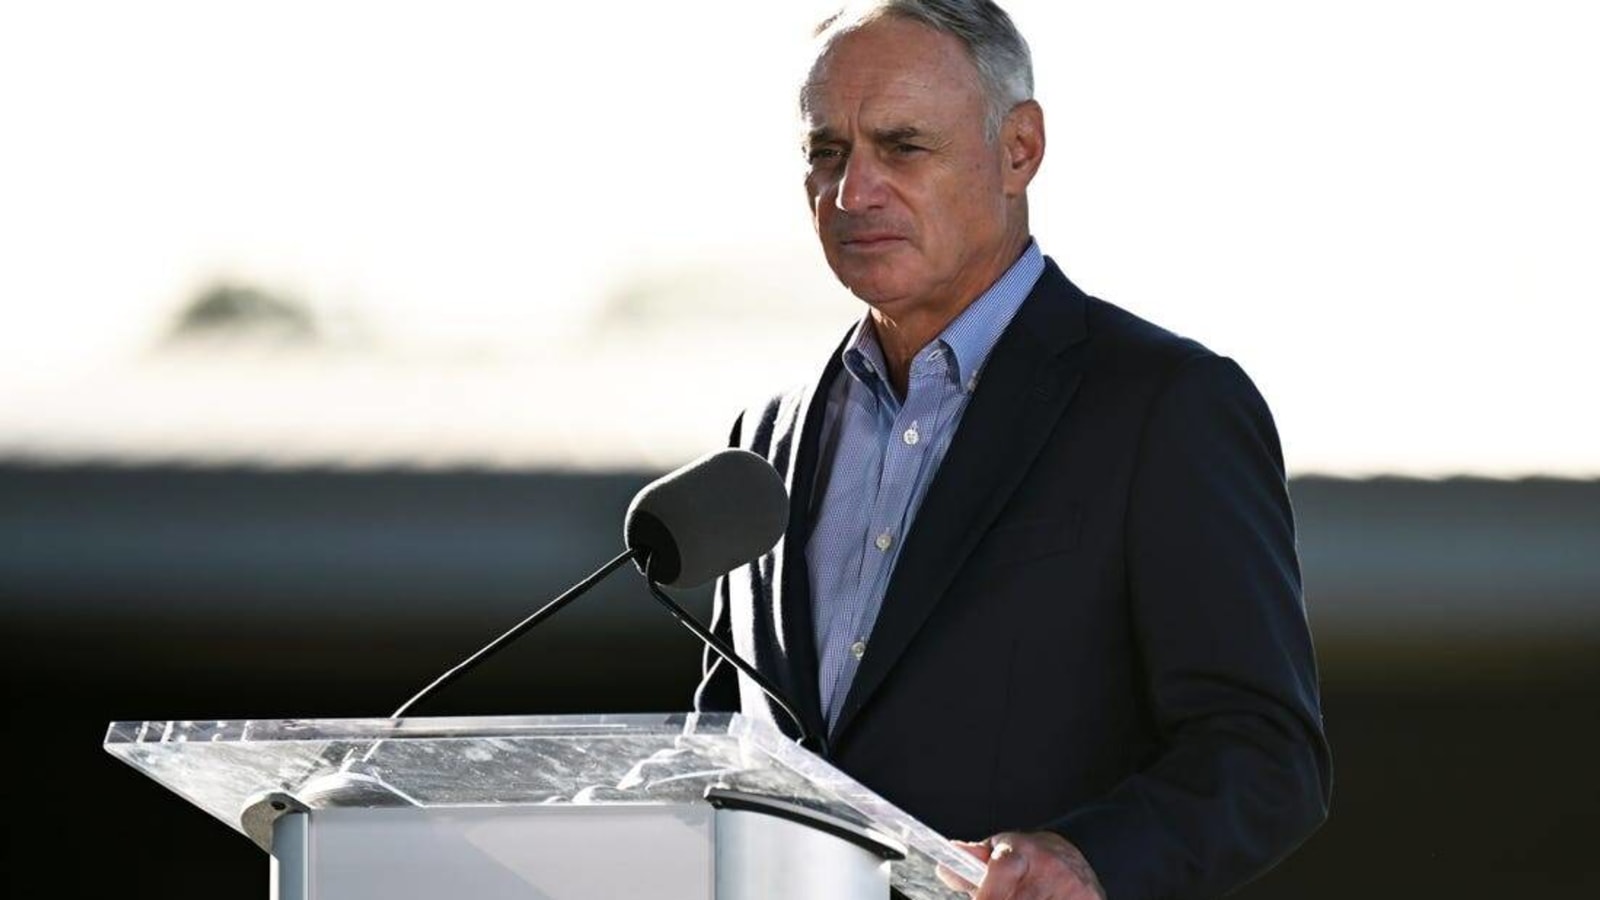 Rob Manfred regrets giving Astros players immunity in scandal